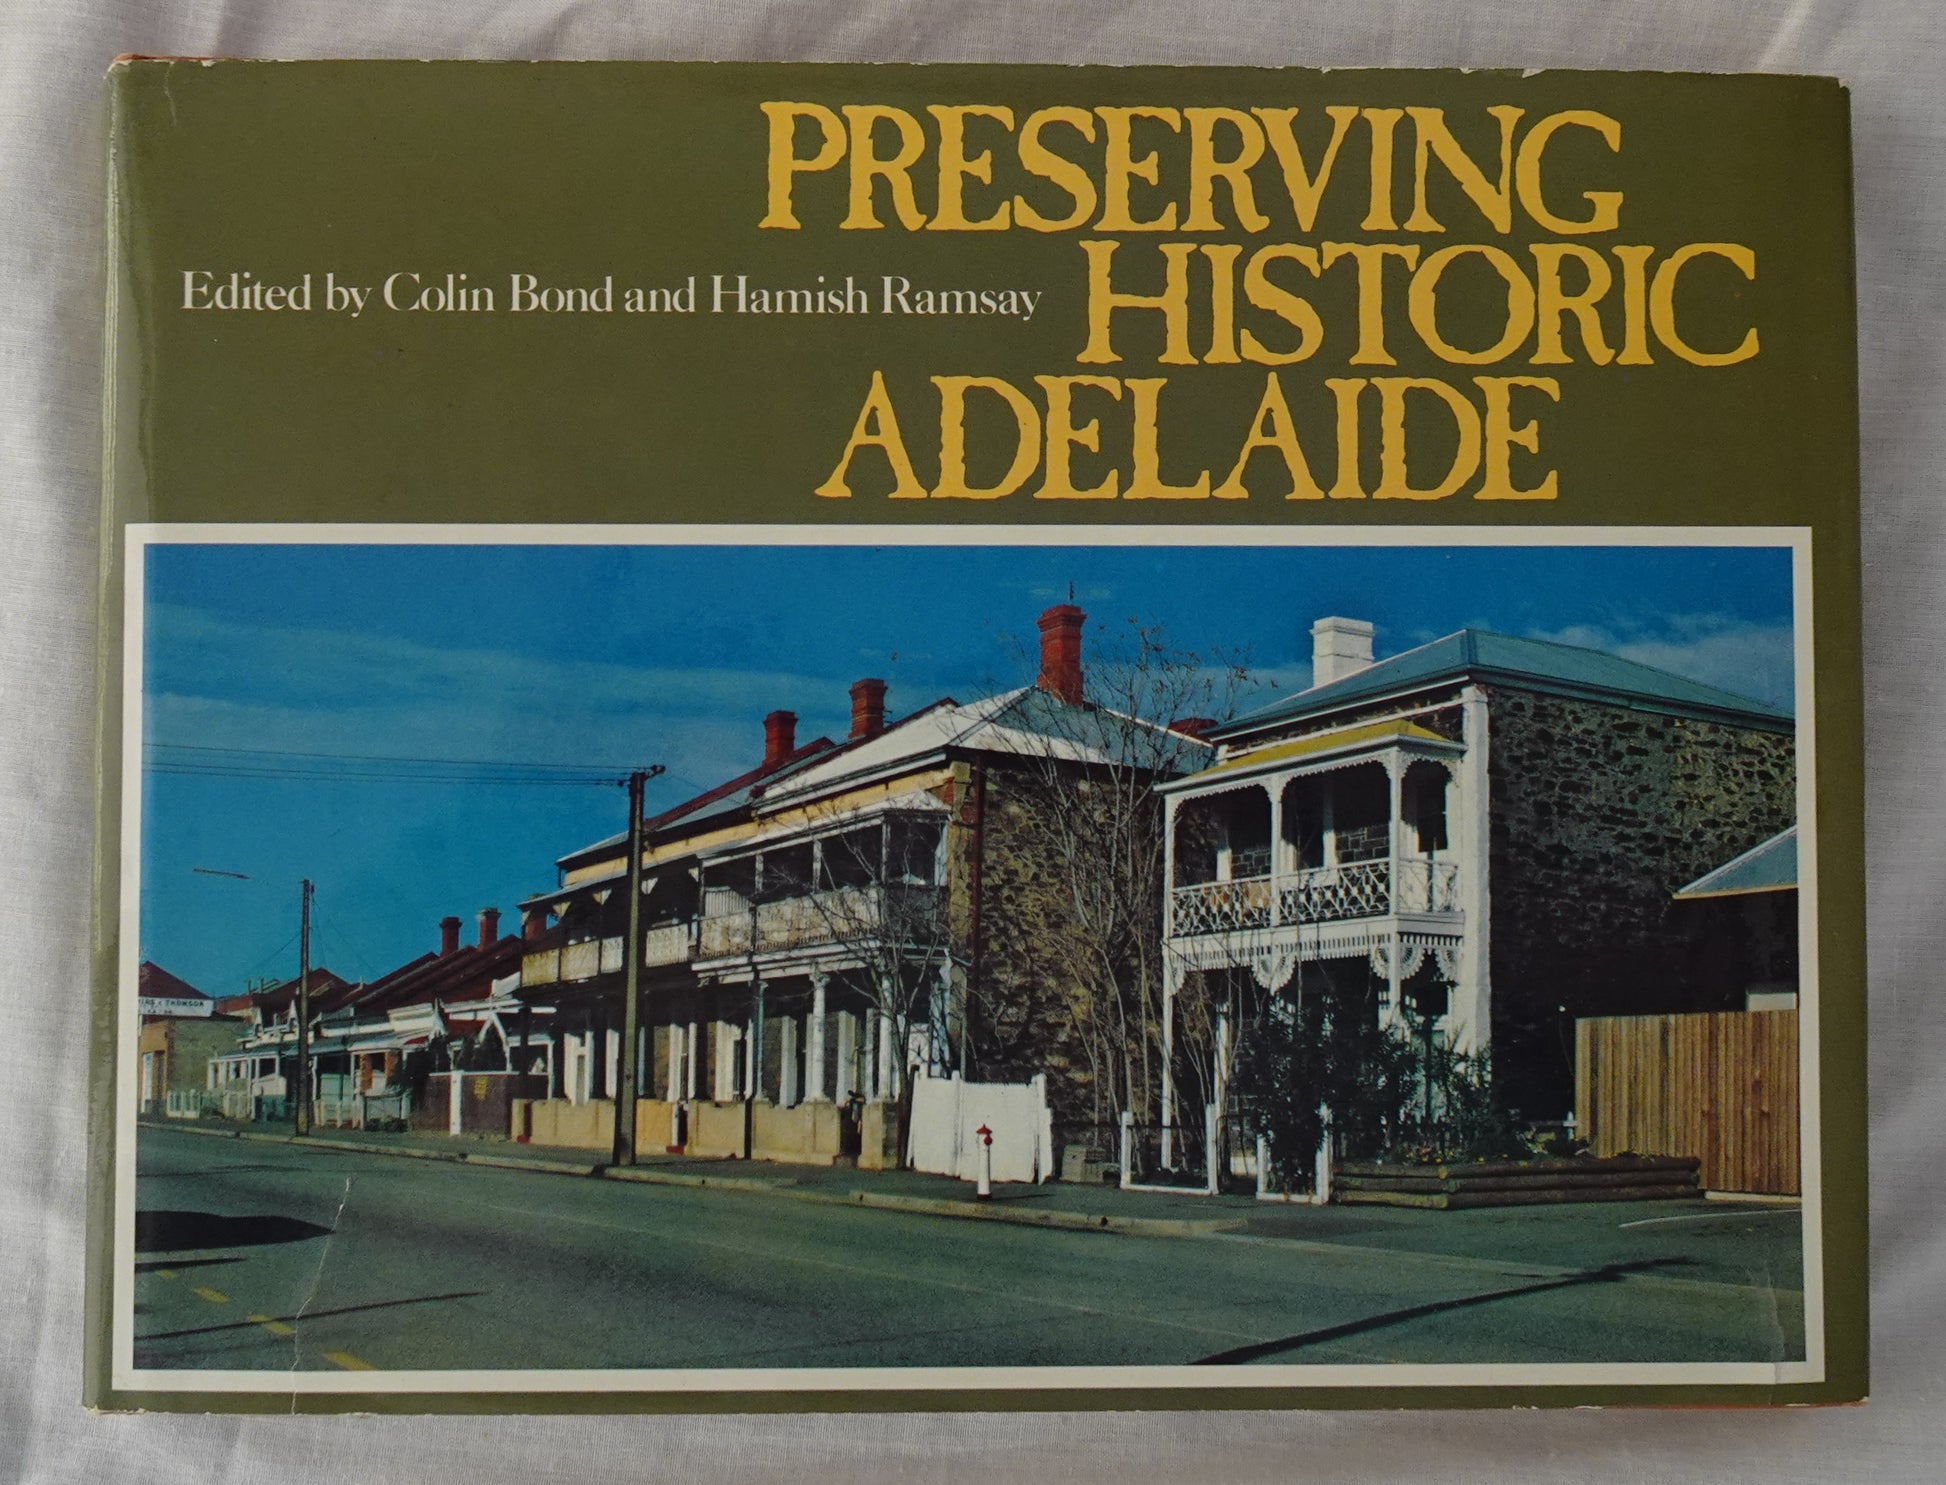 Preserving Historic Adelaide  Edited by Colin Bond and Hamish Ramsay